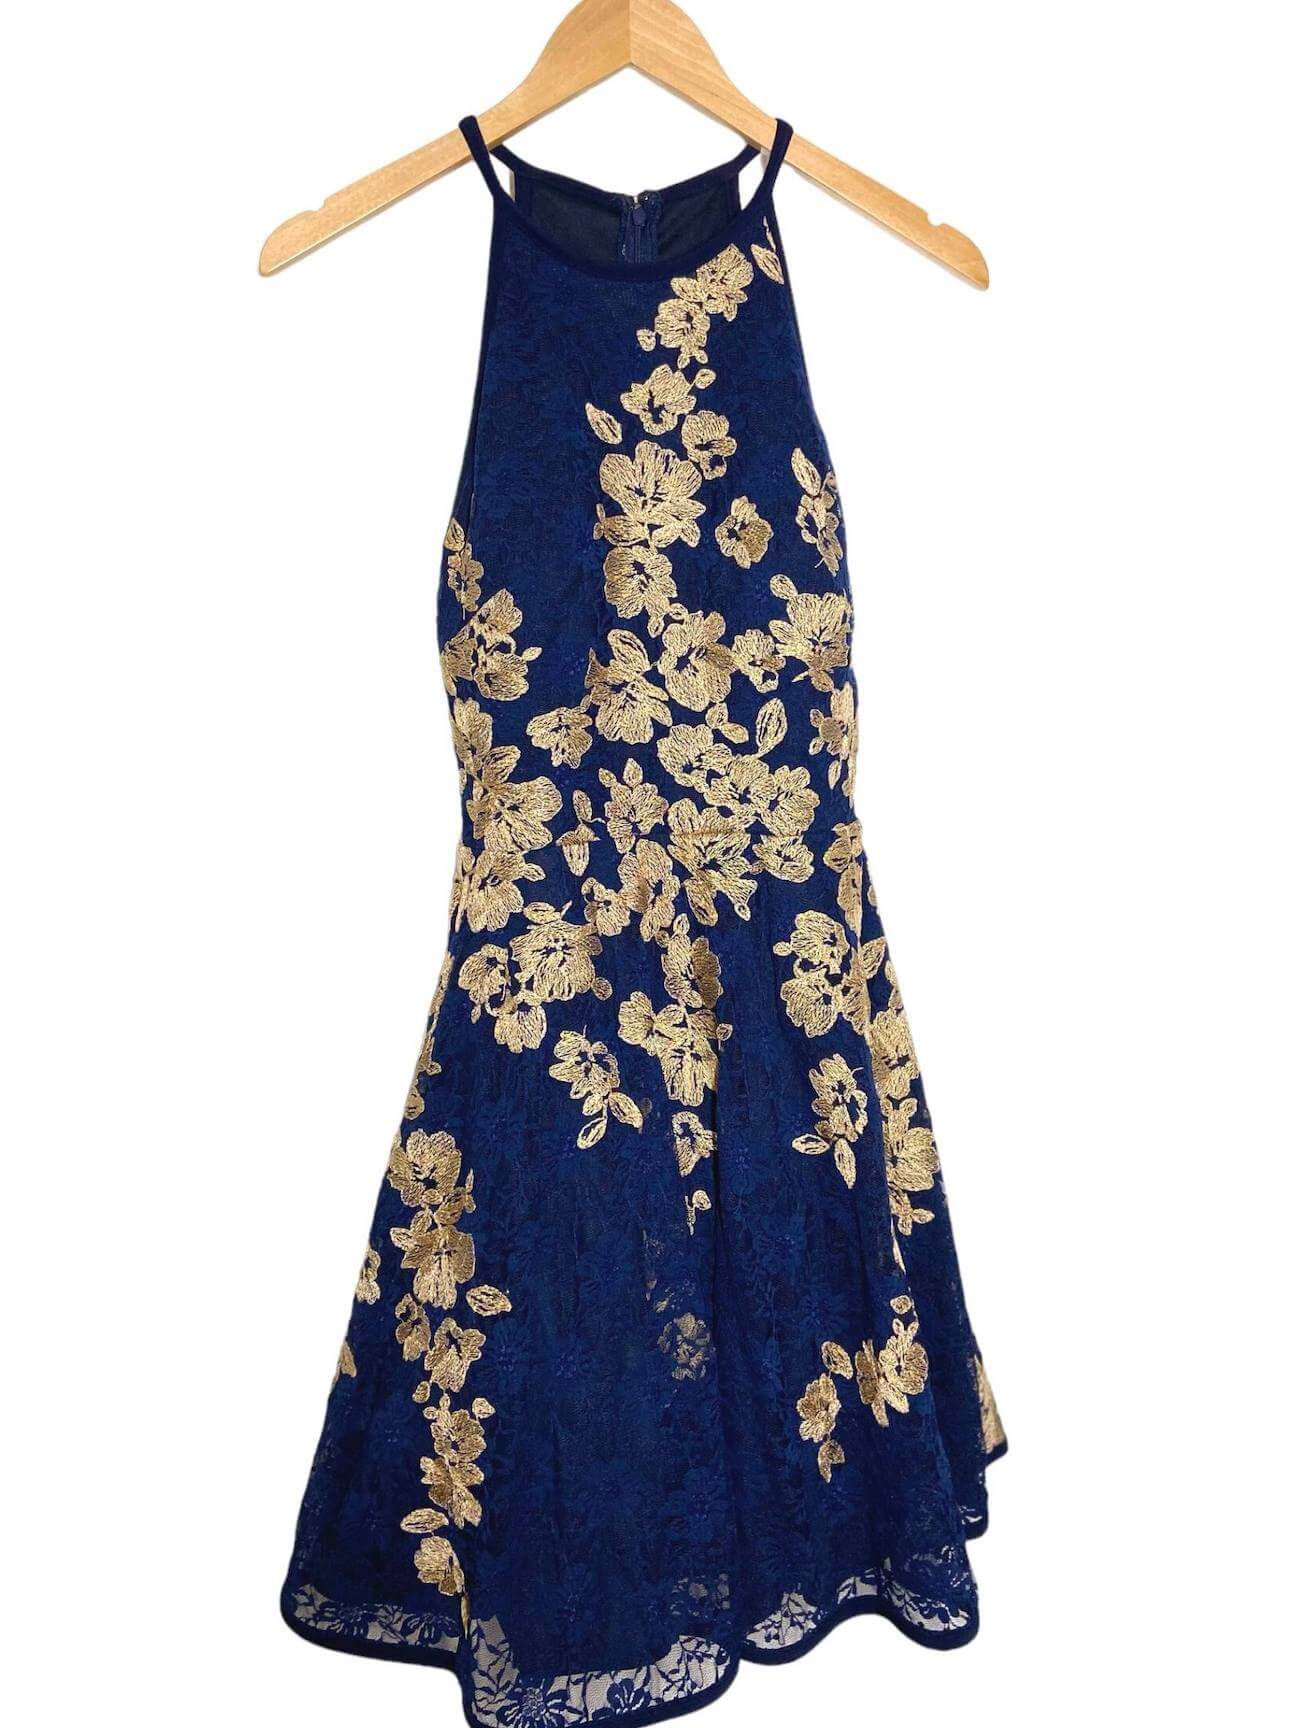 Dark Autumn XSCAPE navy and gold floral embroidered lace halter dress